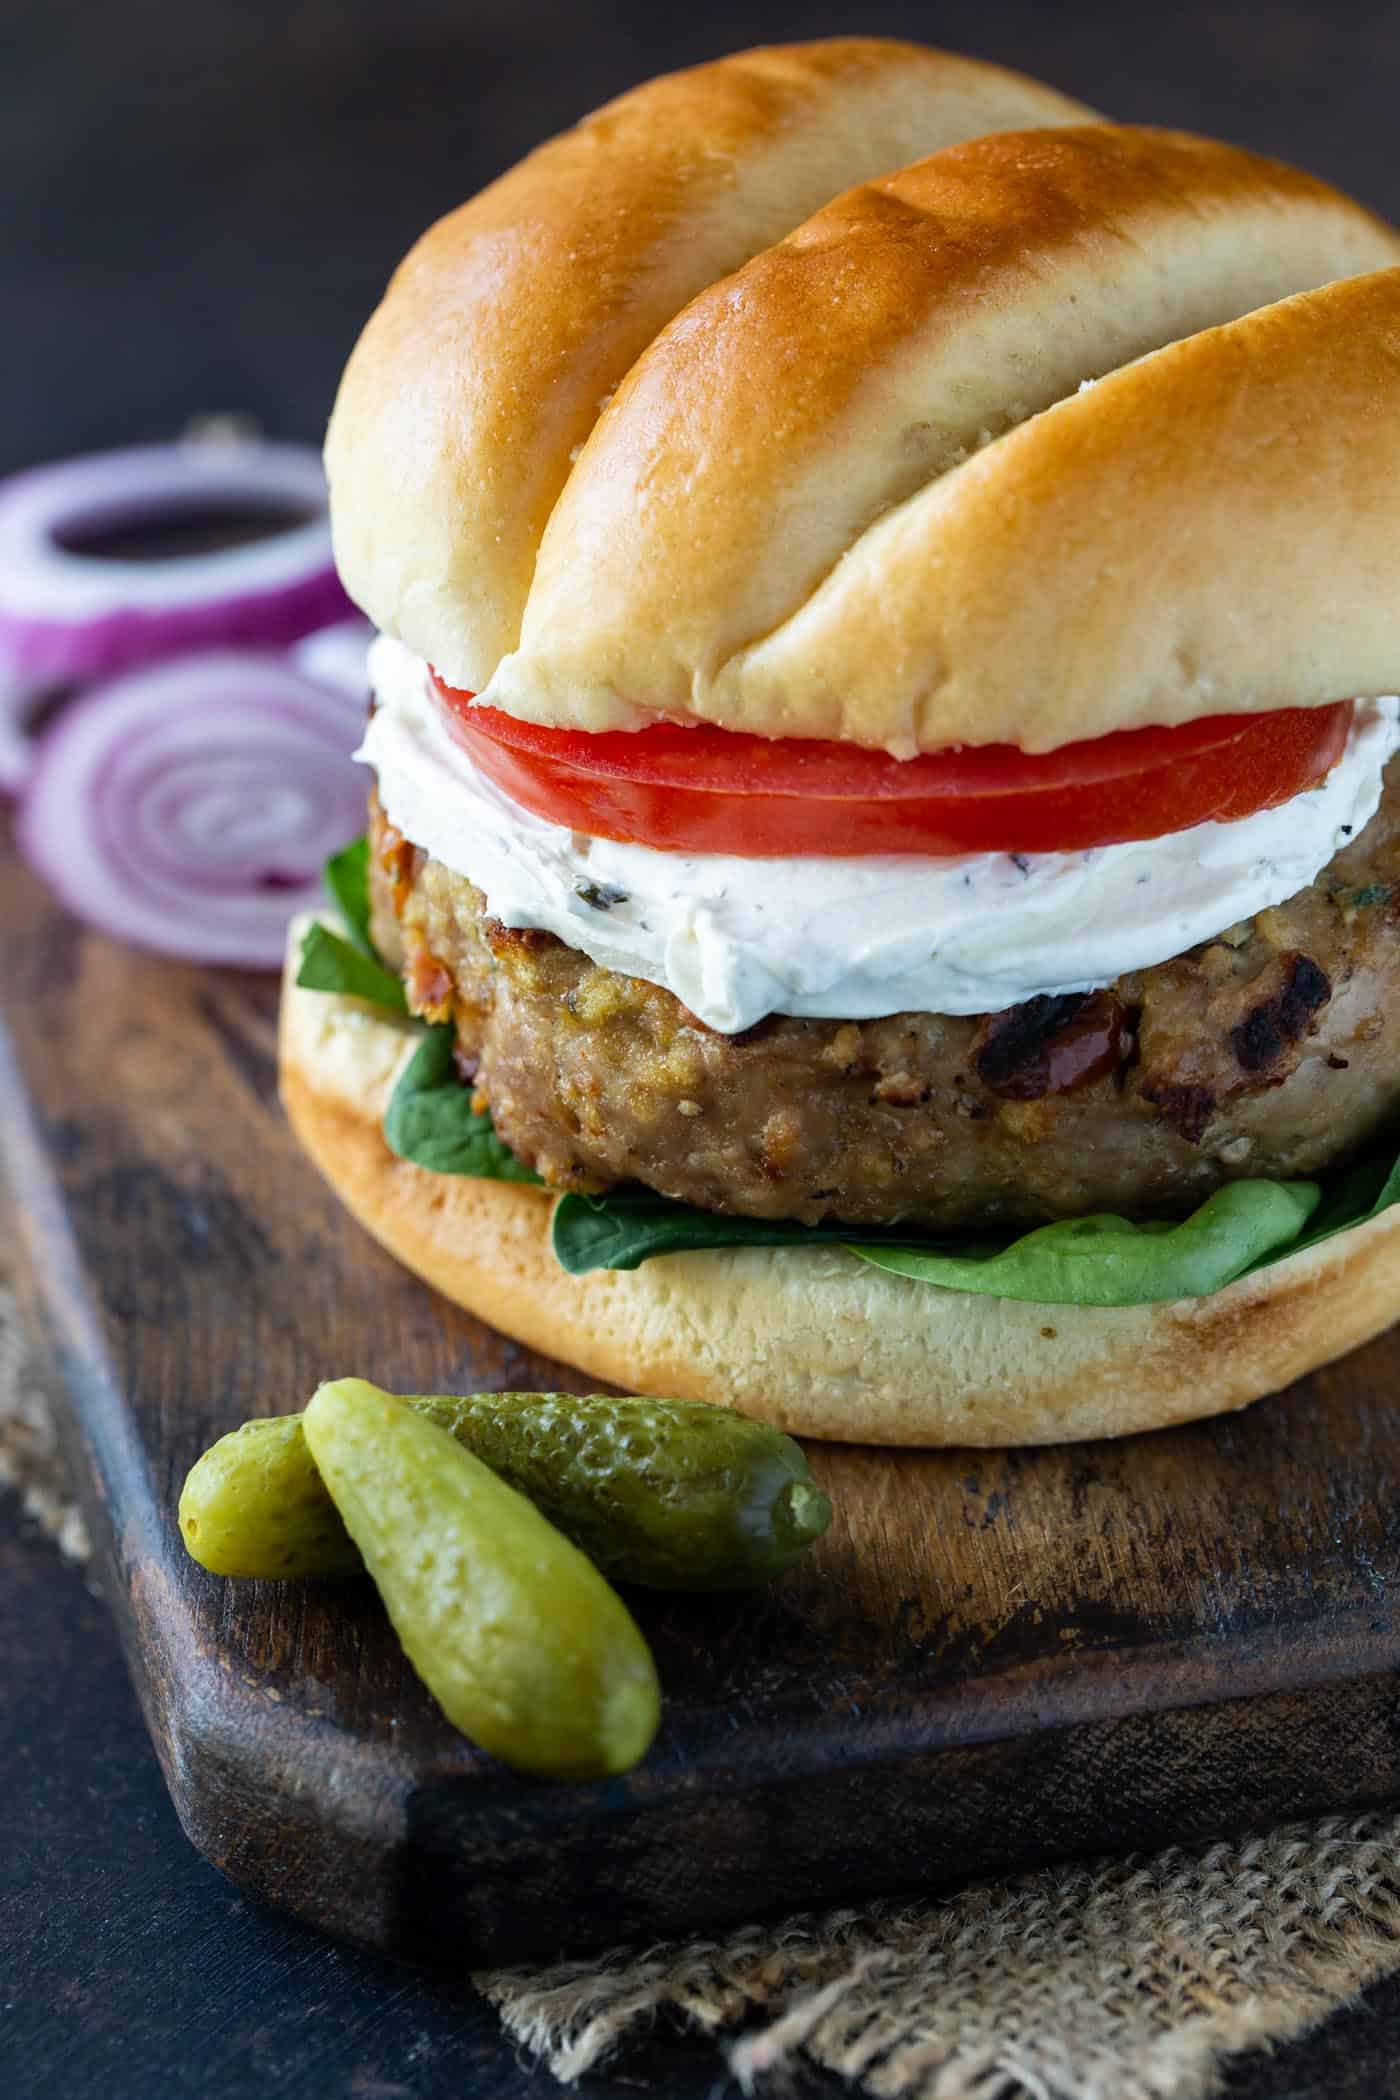 Grilled Turkey Burgers with Sun-dried Tomatoes and Goat Cheese garnished with lettuce, tomato and pickles.